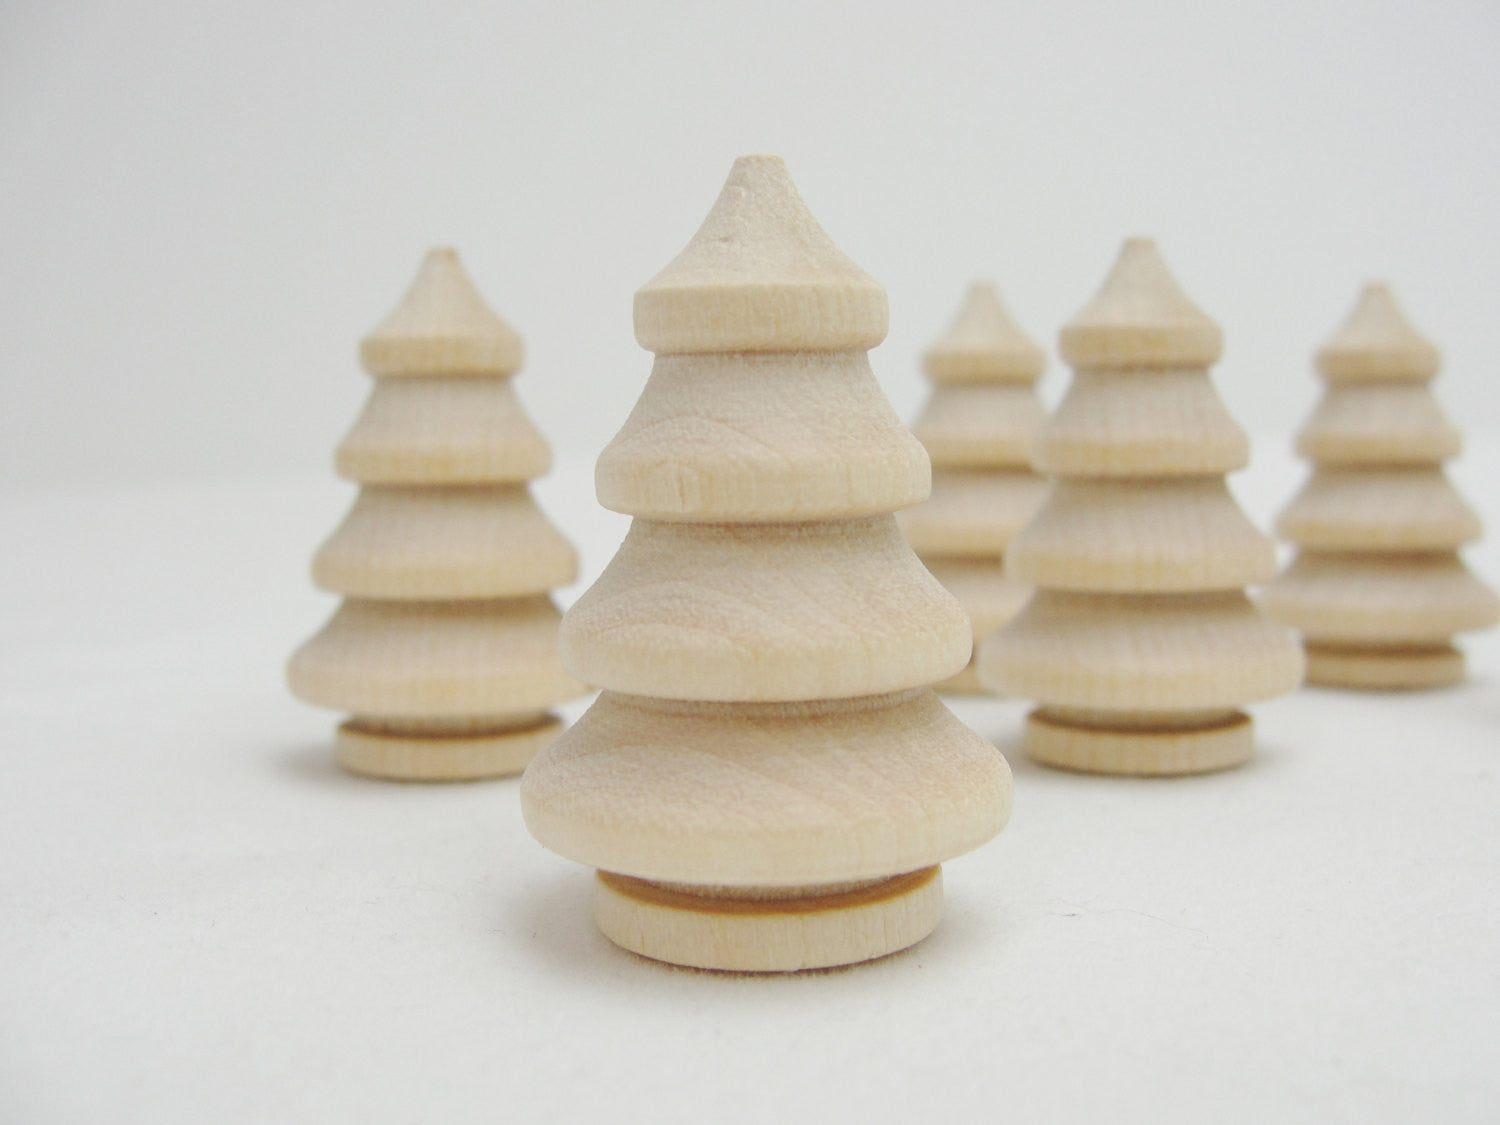 Wooden turned 3 dimensional tree 1 3/8" set of 6 - Wood parts - Craft Supply House